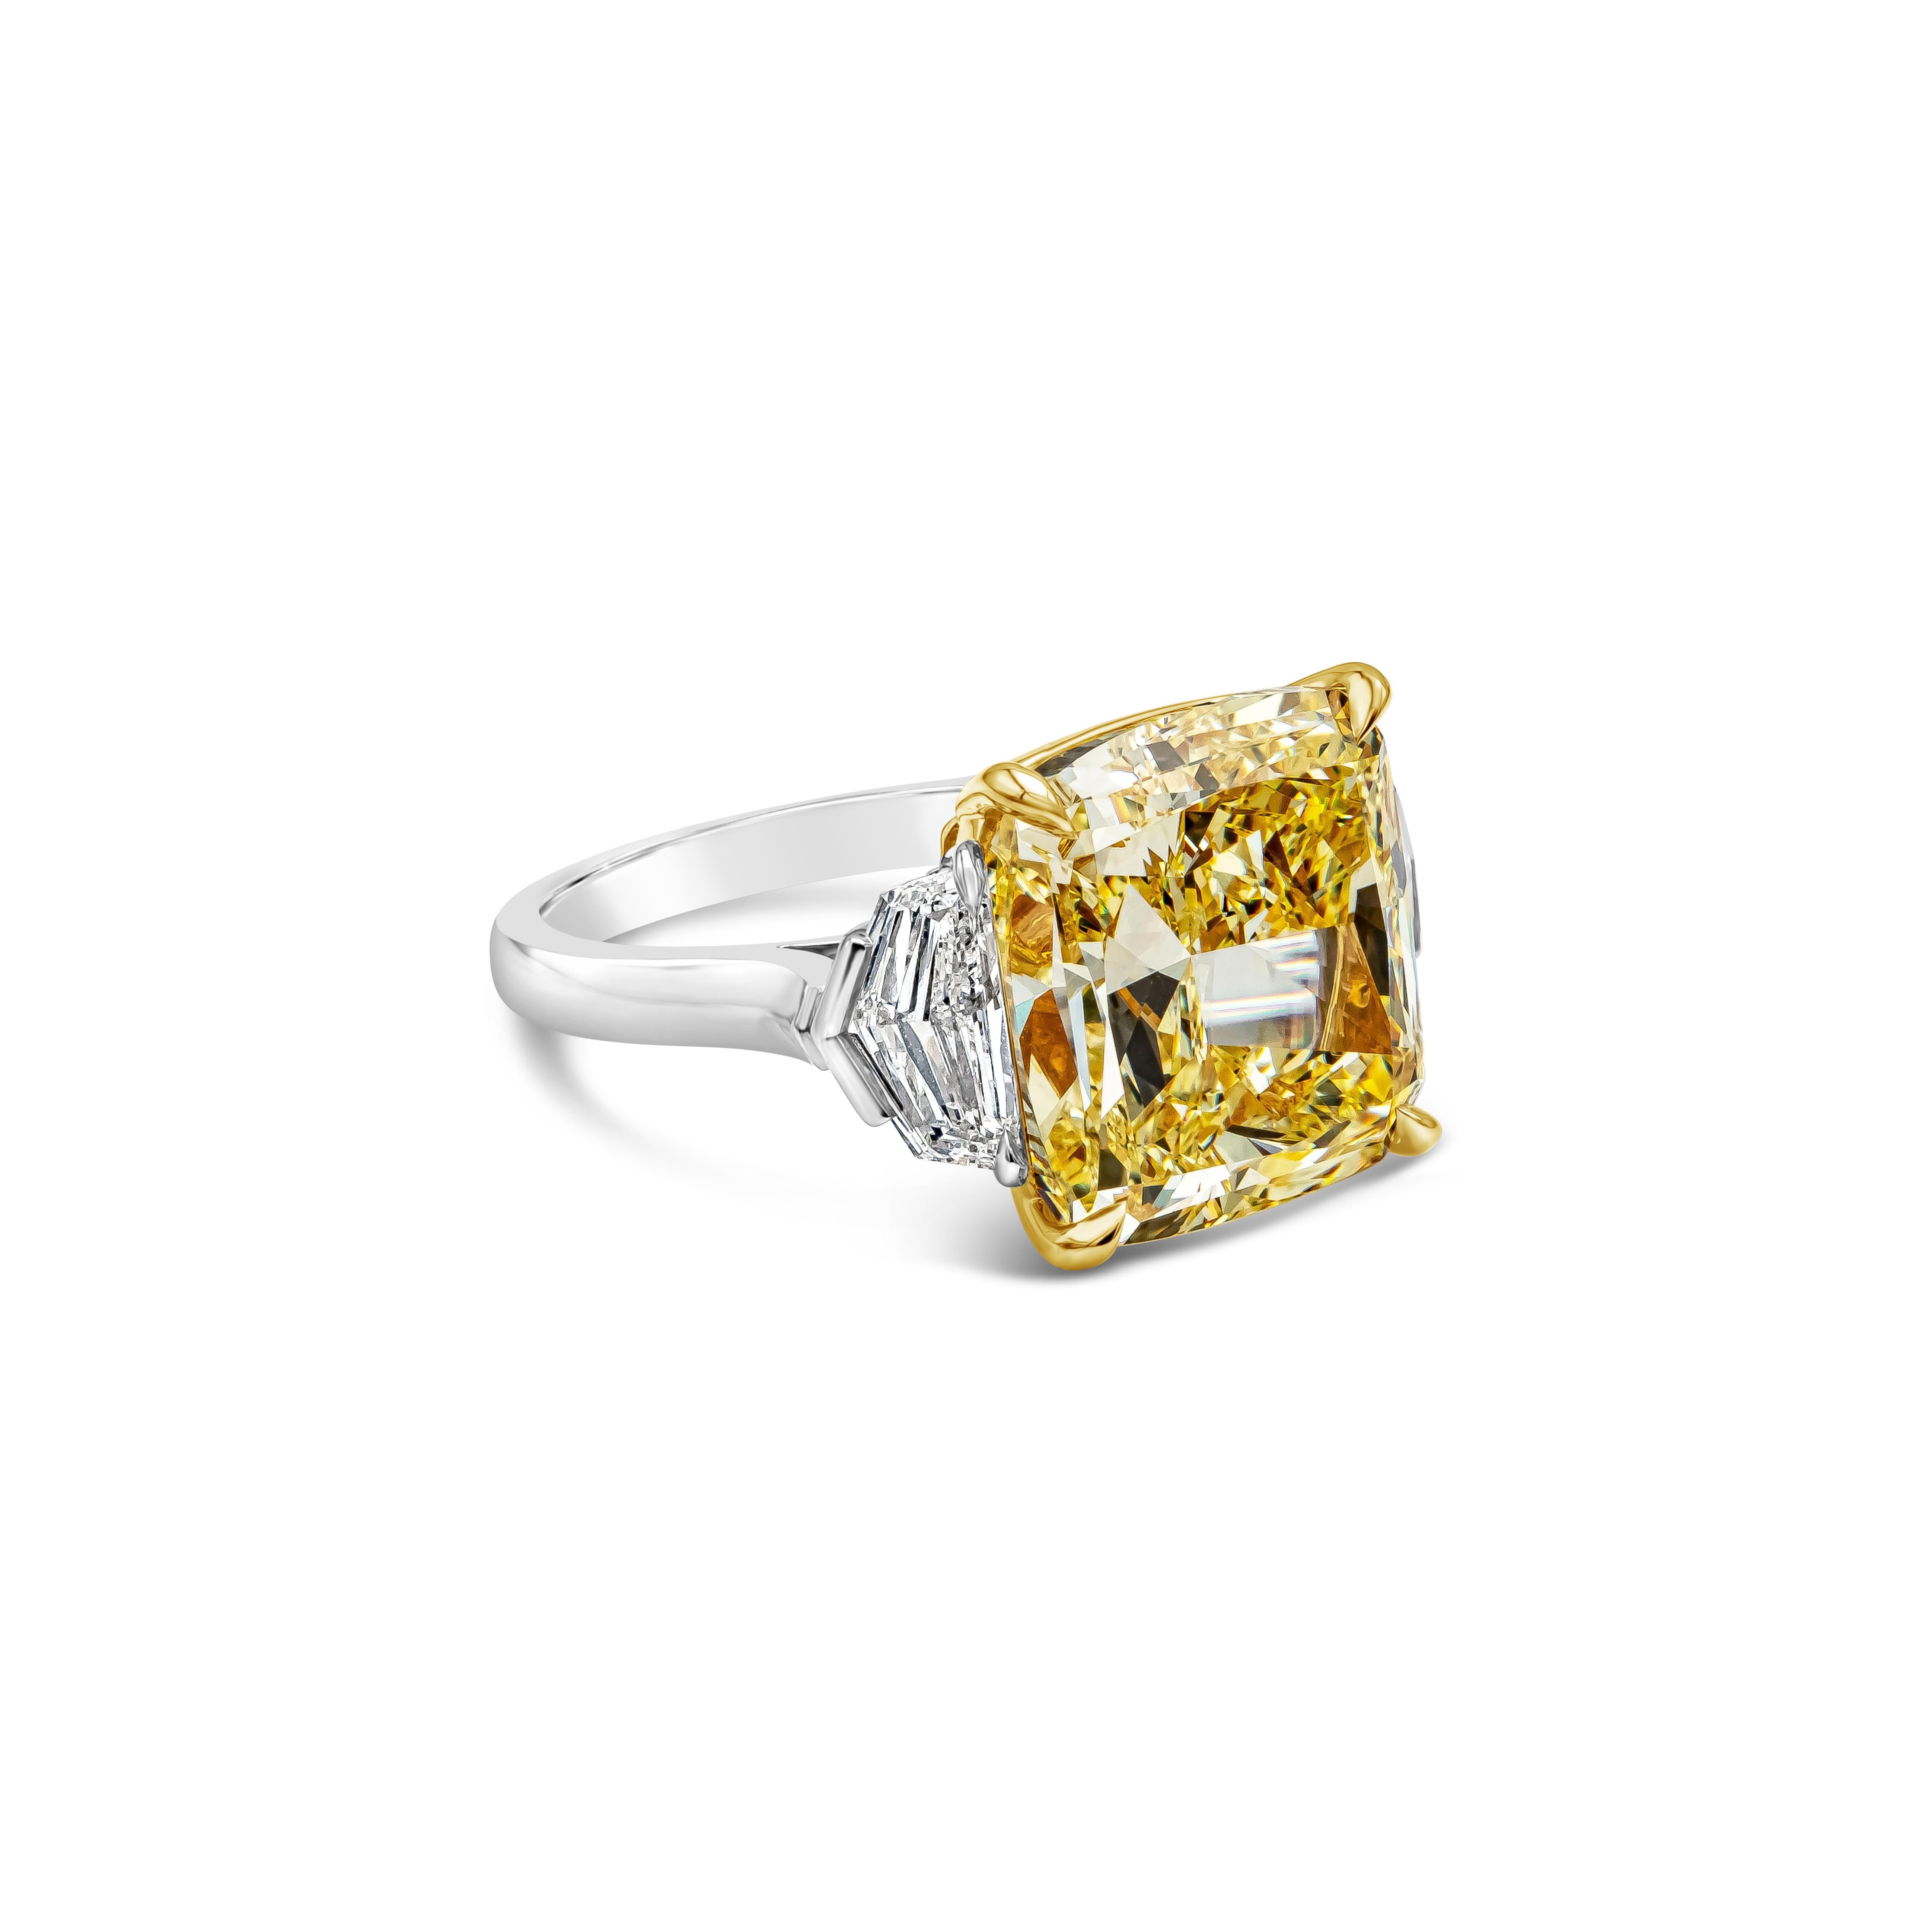 Elegantly crafted three stone engagement ring features a 10.02 carat cushion cut diamond certified by GIA as fancy yellow color, VS2 in clarity. Flanking the center stone are 2 GIA certified epaulette diamonds, D color and VS in clarity, set in